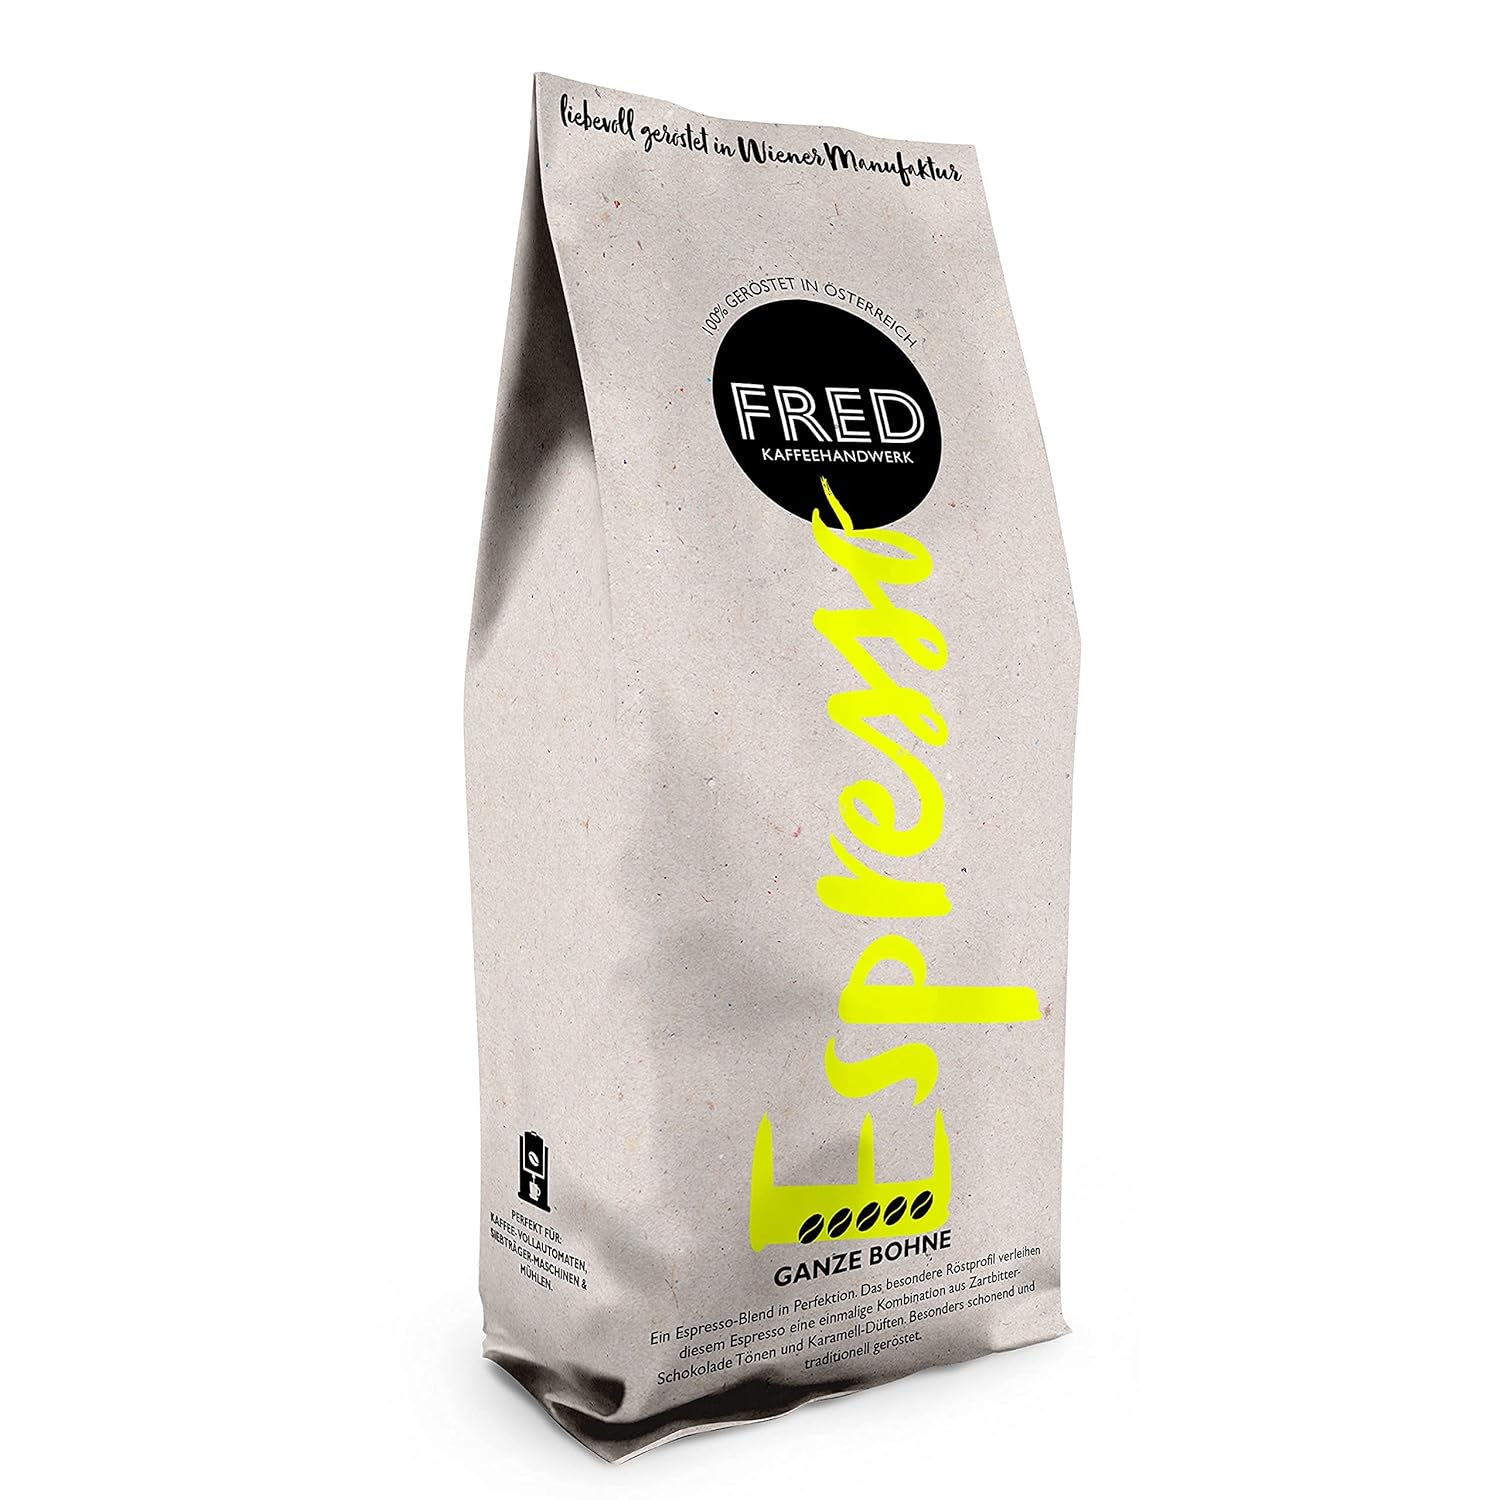 Fred coffee whole bean 500g, espresso, manufactory coffee from Vienna, top quality, hand-picked beans - your new favorite coffee
